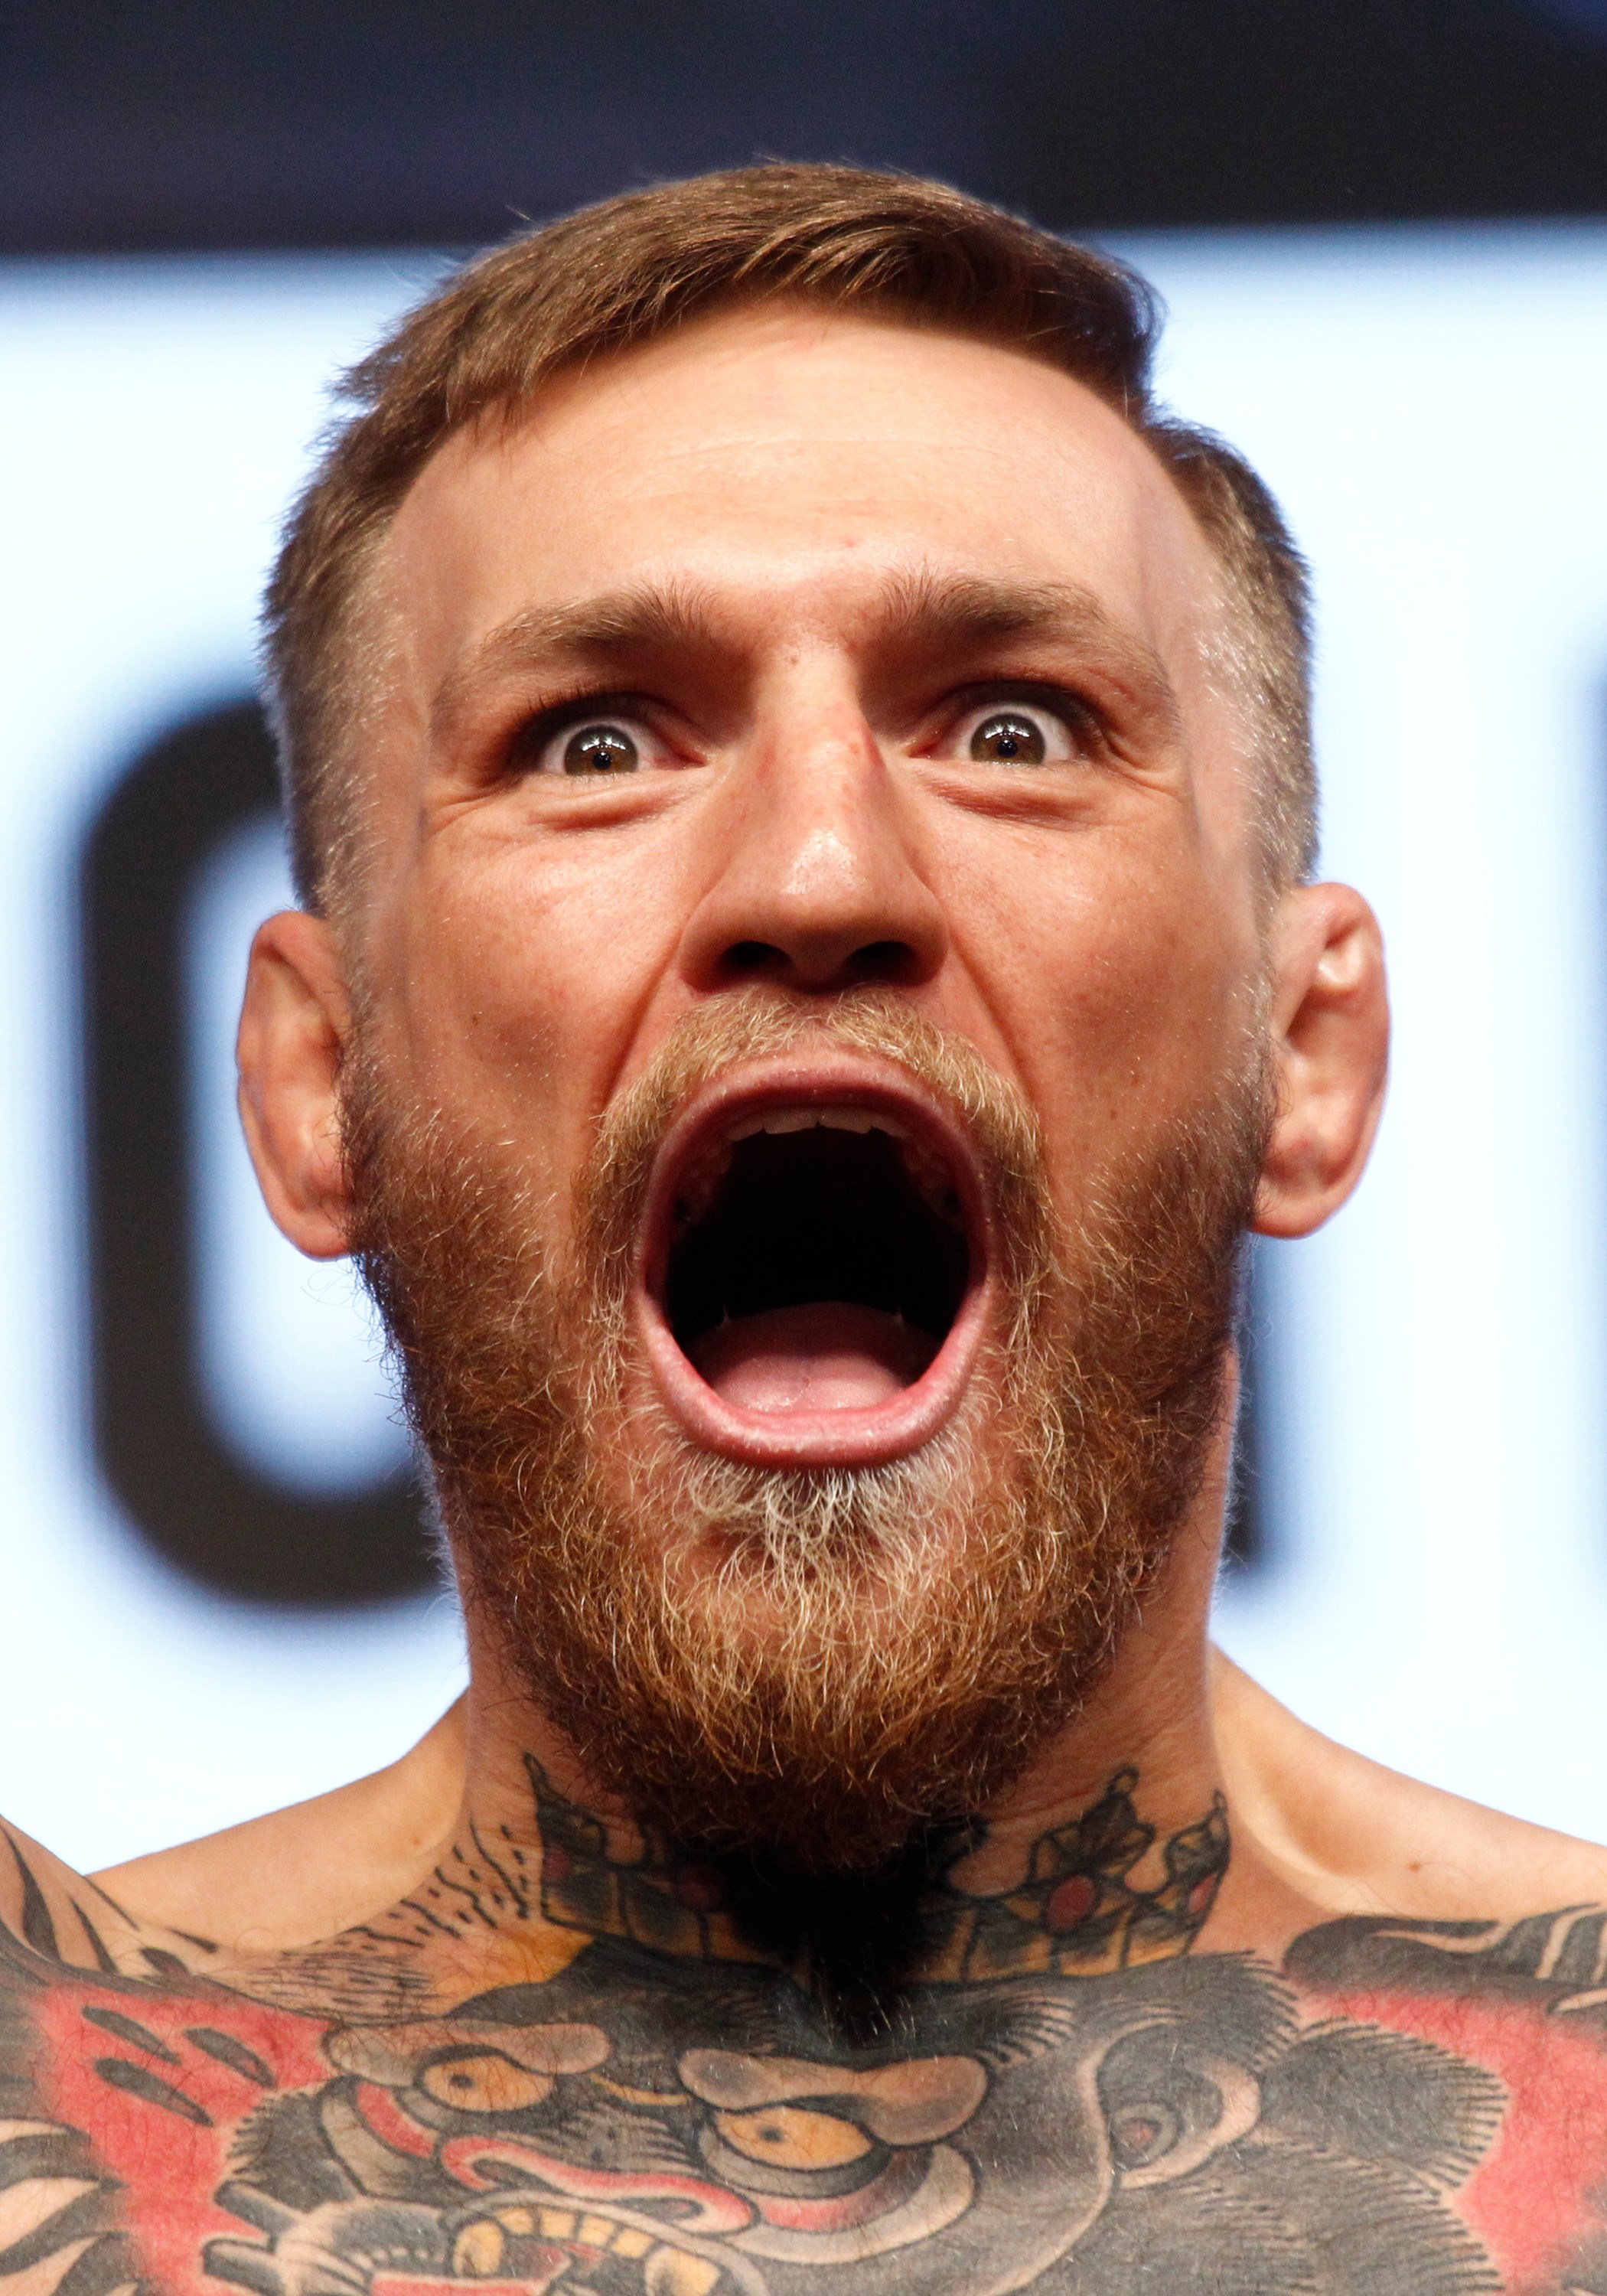 how much do ufc fighters make? conor macgregor is among the top ufc earners